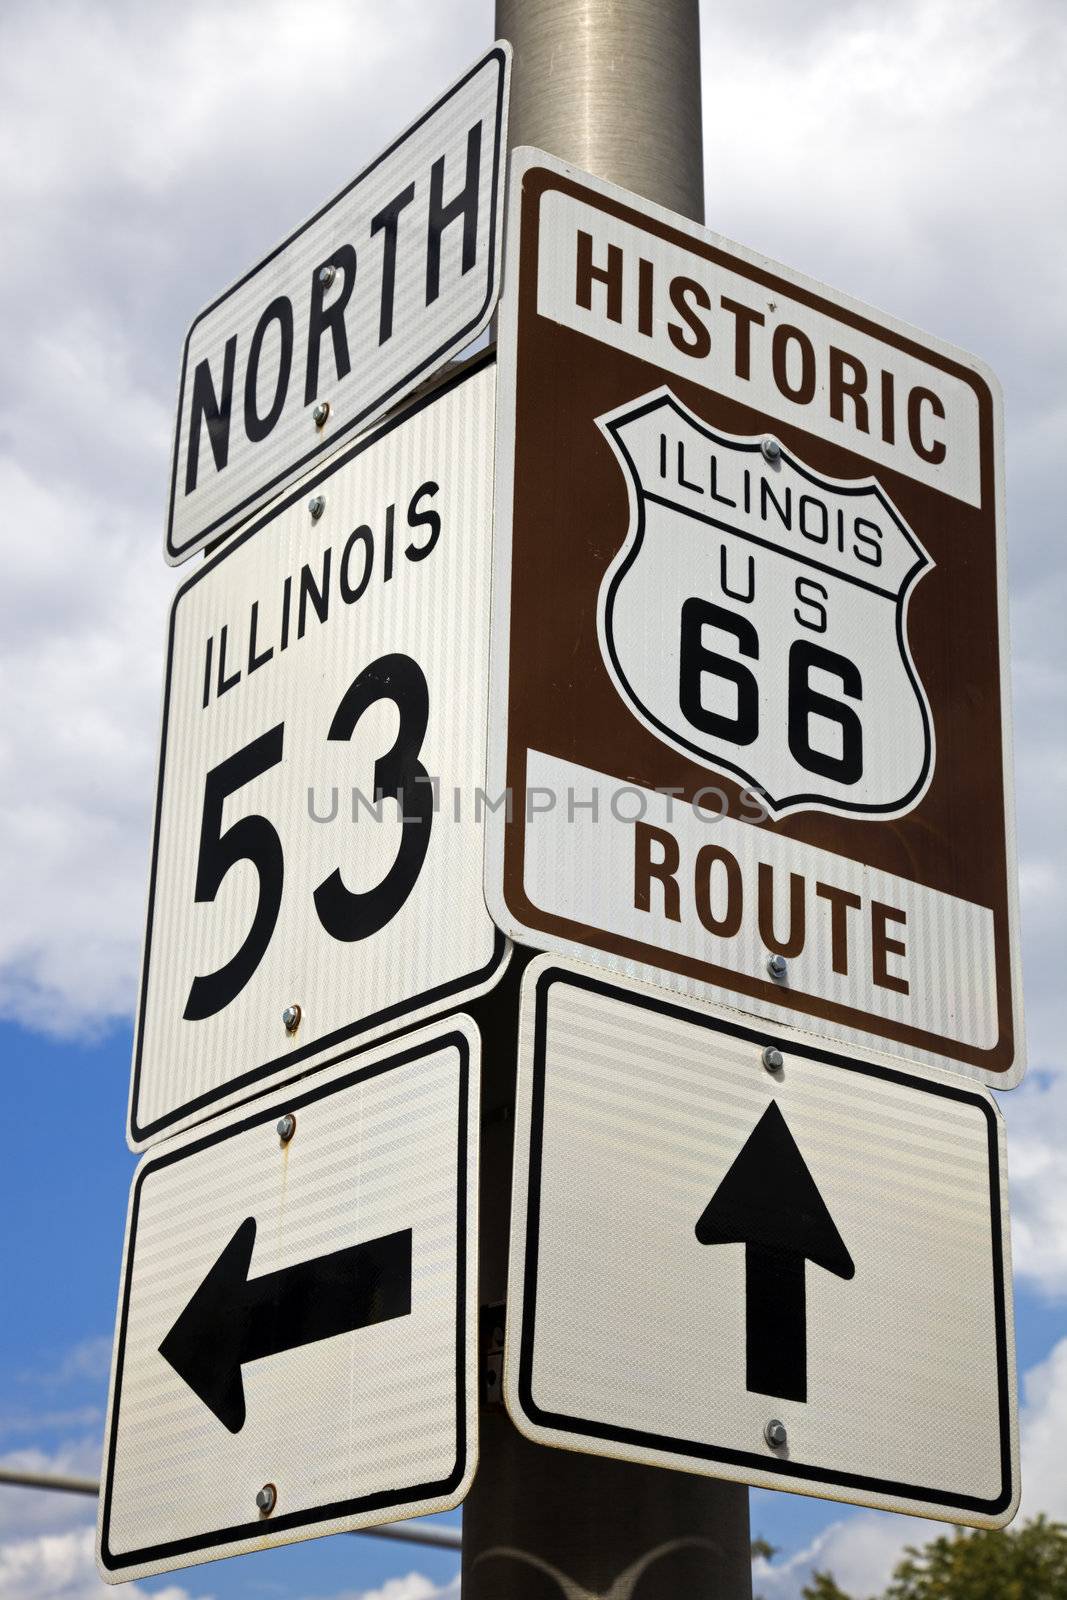 Historic Route 66 by benkrut